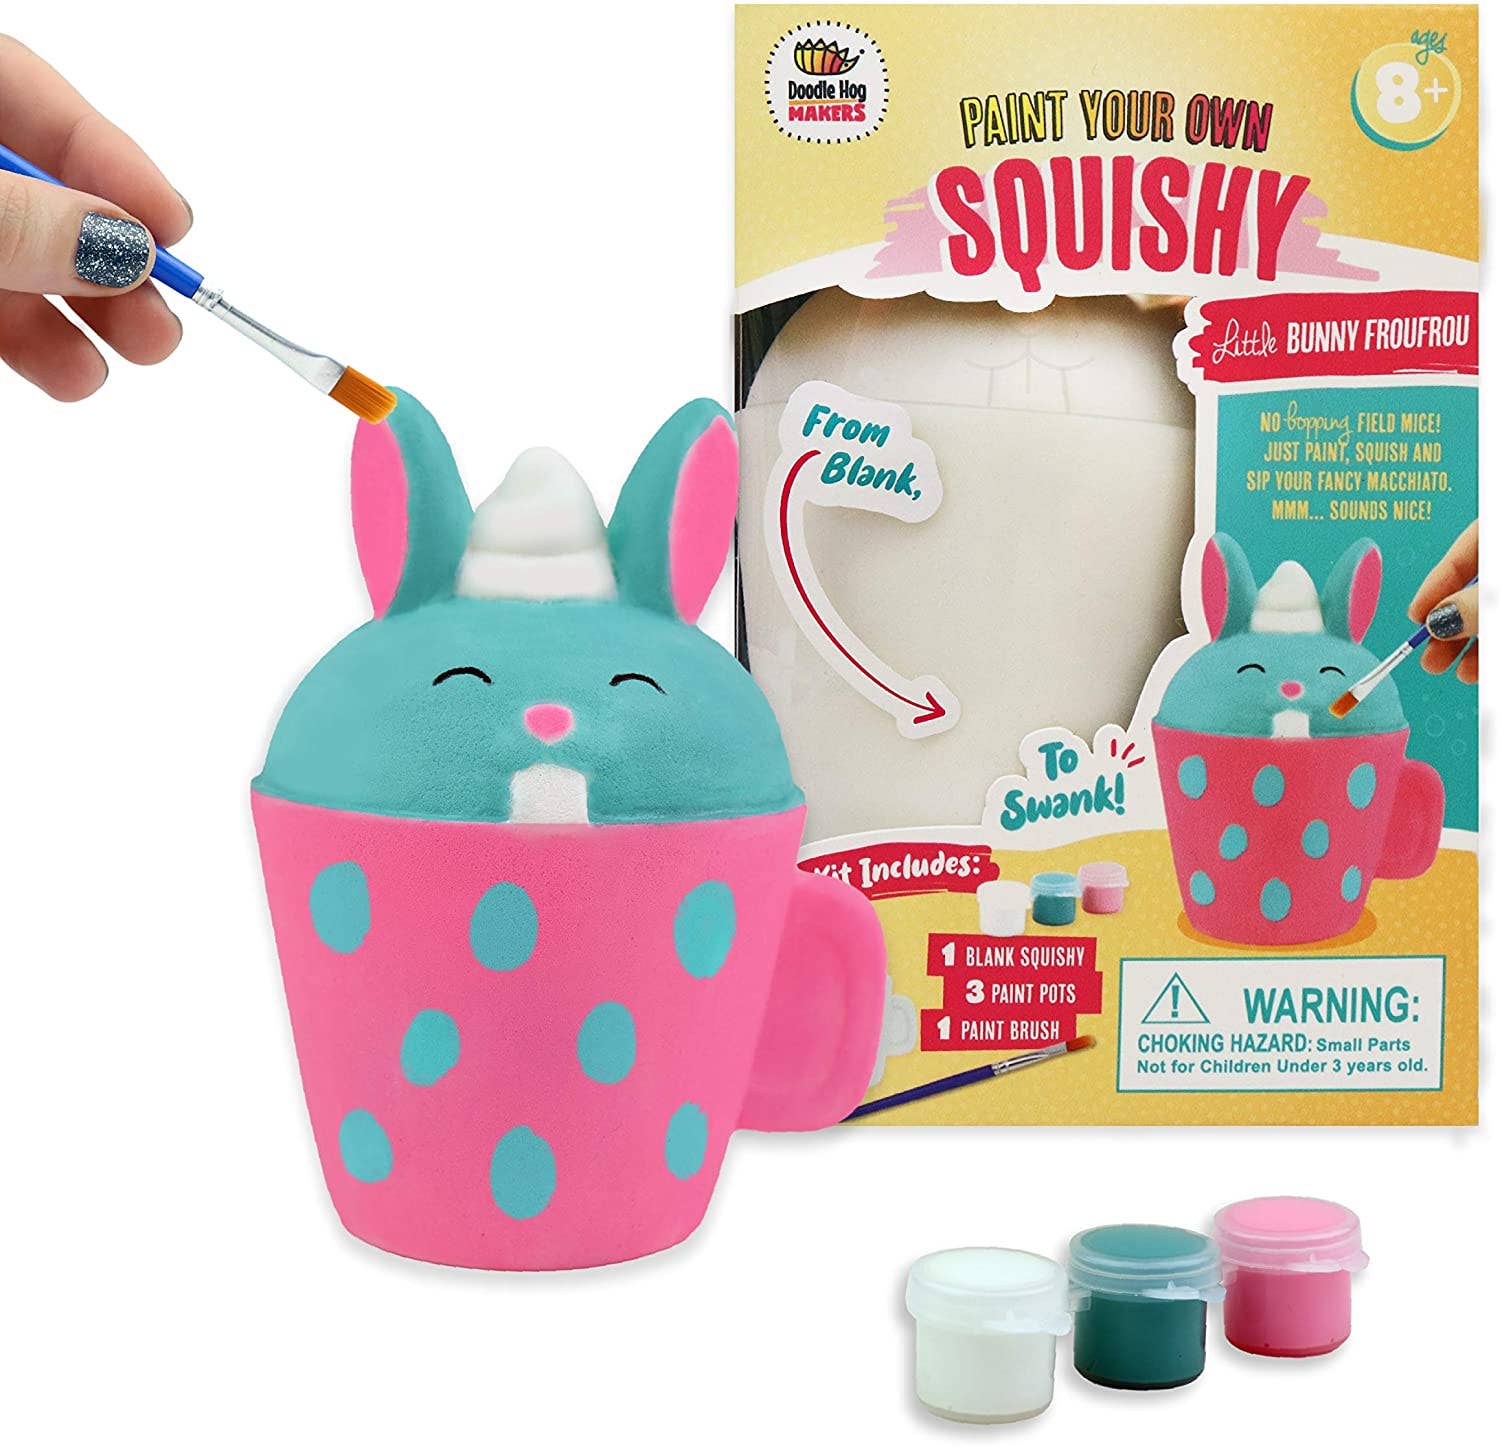 Squishy Painting Kit - Little Bunny FrouFrou - Colors & Cocktails